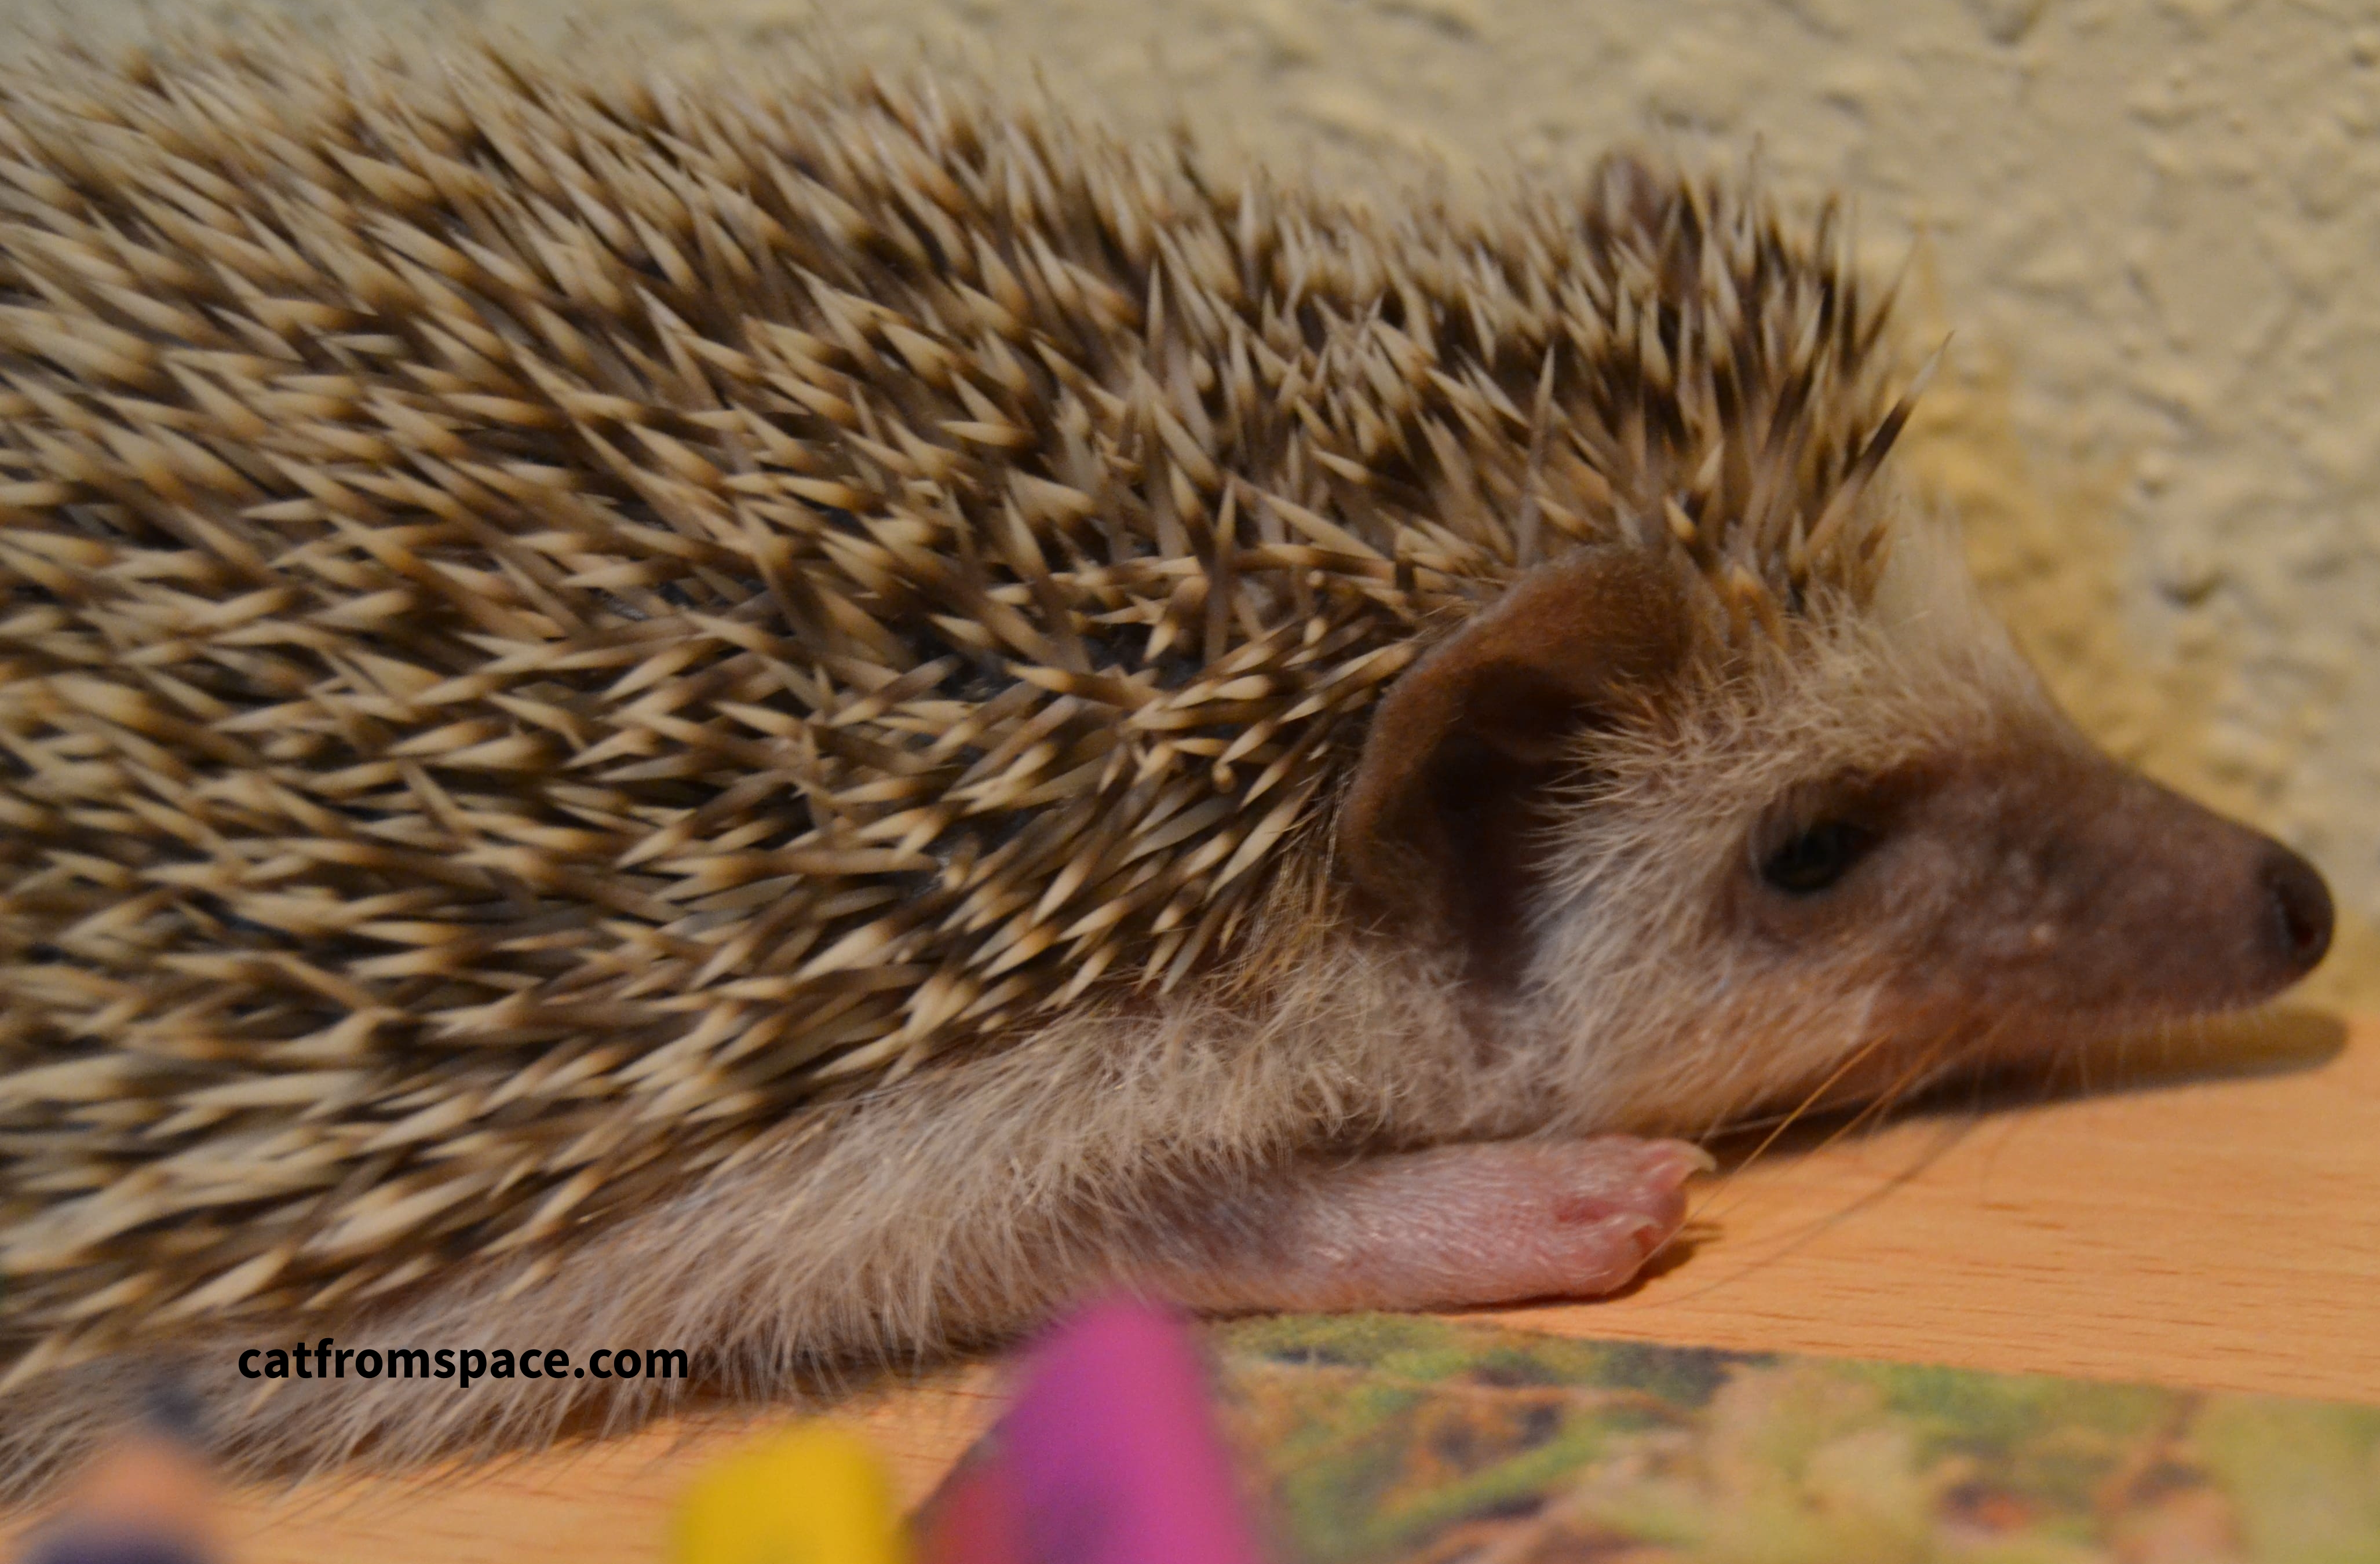 Tired Hedgehog by Patty Flowers for Cat from Space